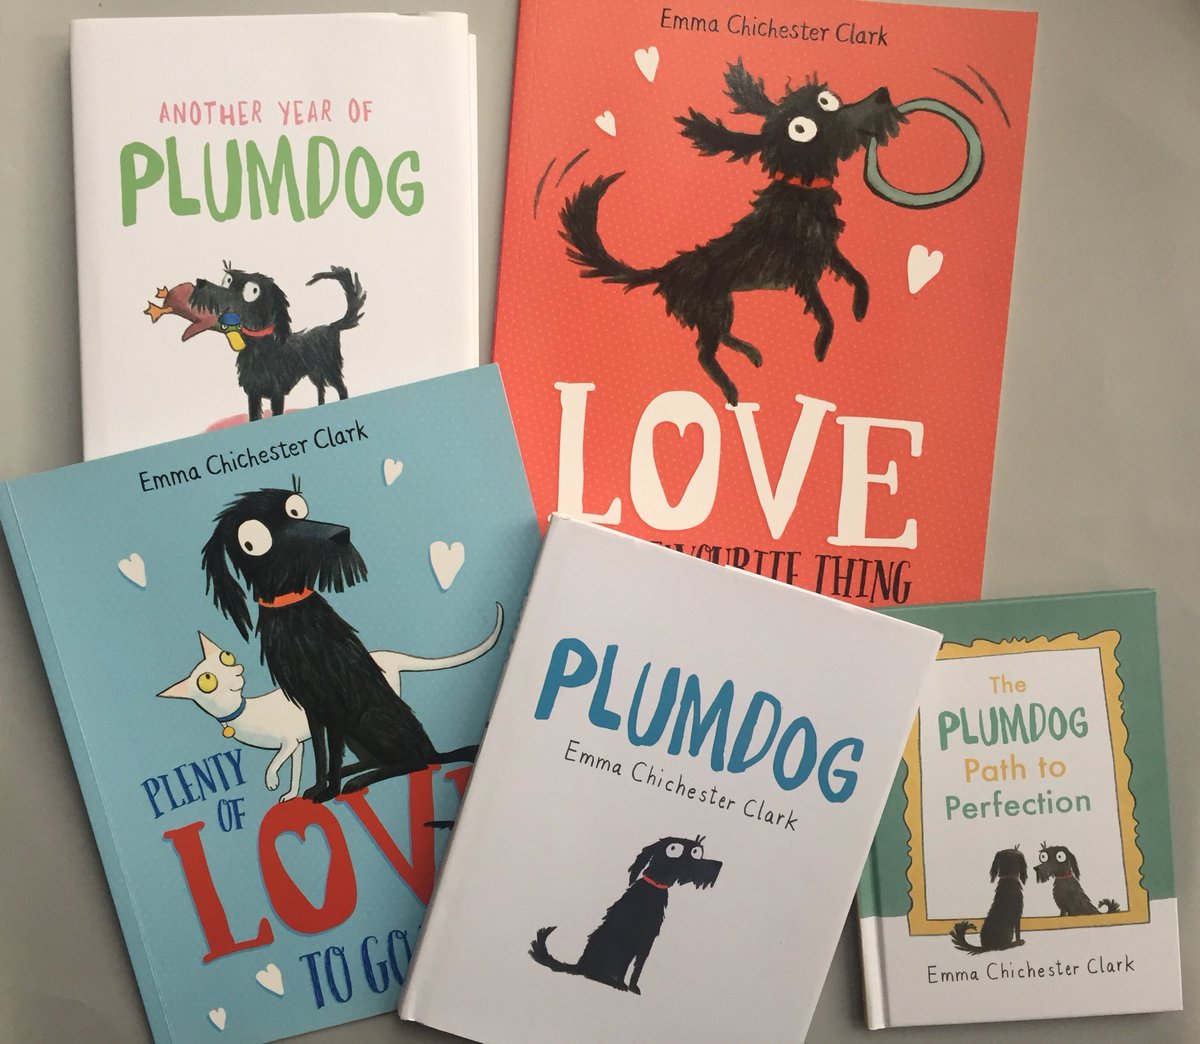 No.30  #LibraryTop59 Emma Chichester Clark  @emmachichesterc uses gorgeous colour palettes and clever designs in her famous Blue Kangaroo books. Visit her Plum Dog Blog  http://emmachichesterclark.blogspot.com  for painted scenes from real life that inspired books about him  https://en.m.wikipedia.org/wiki/Emma_Chichester_Clark